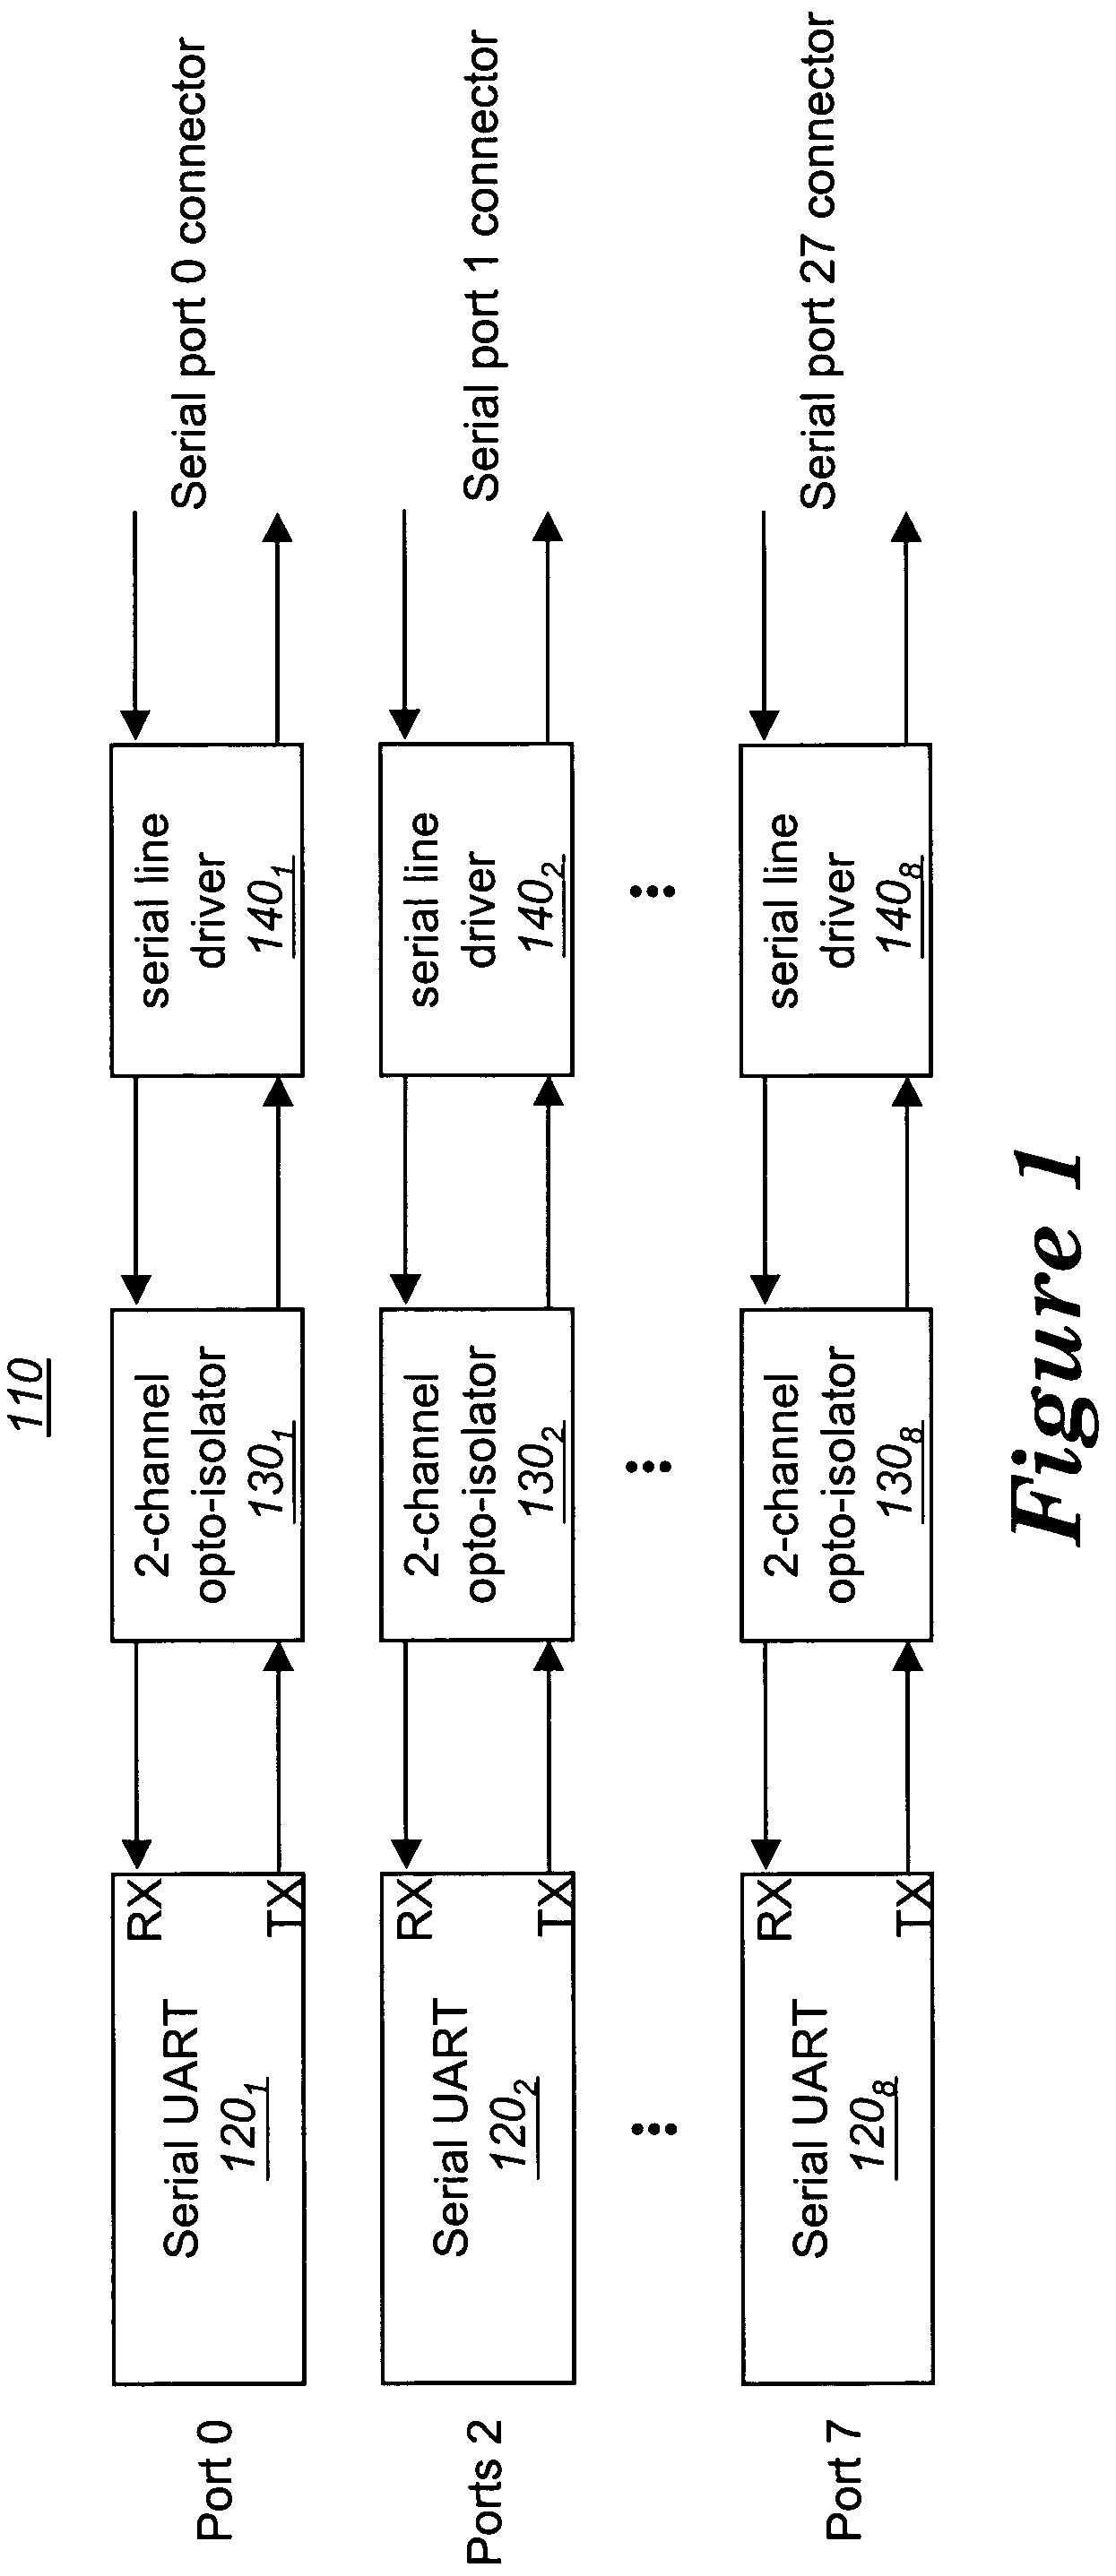 Serial line circuit, an apparatus implemented with a serial line circuit, and method thereof